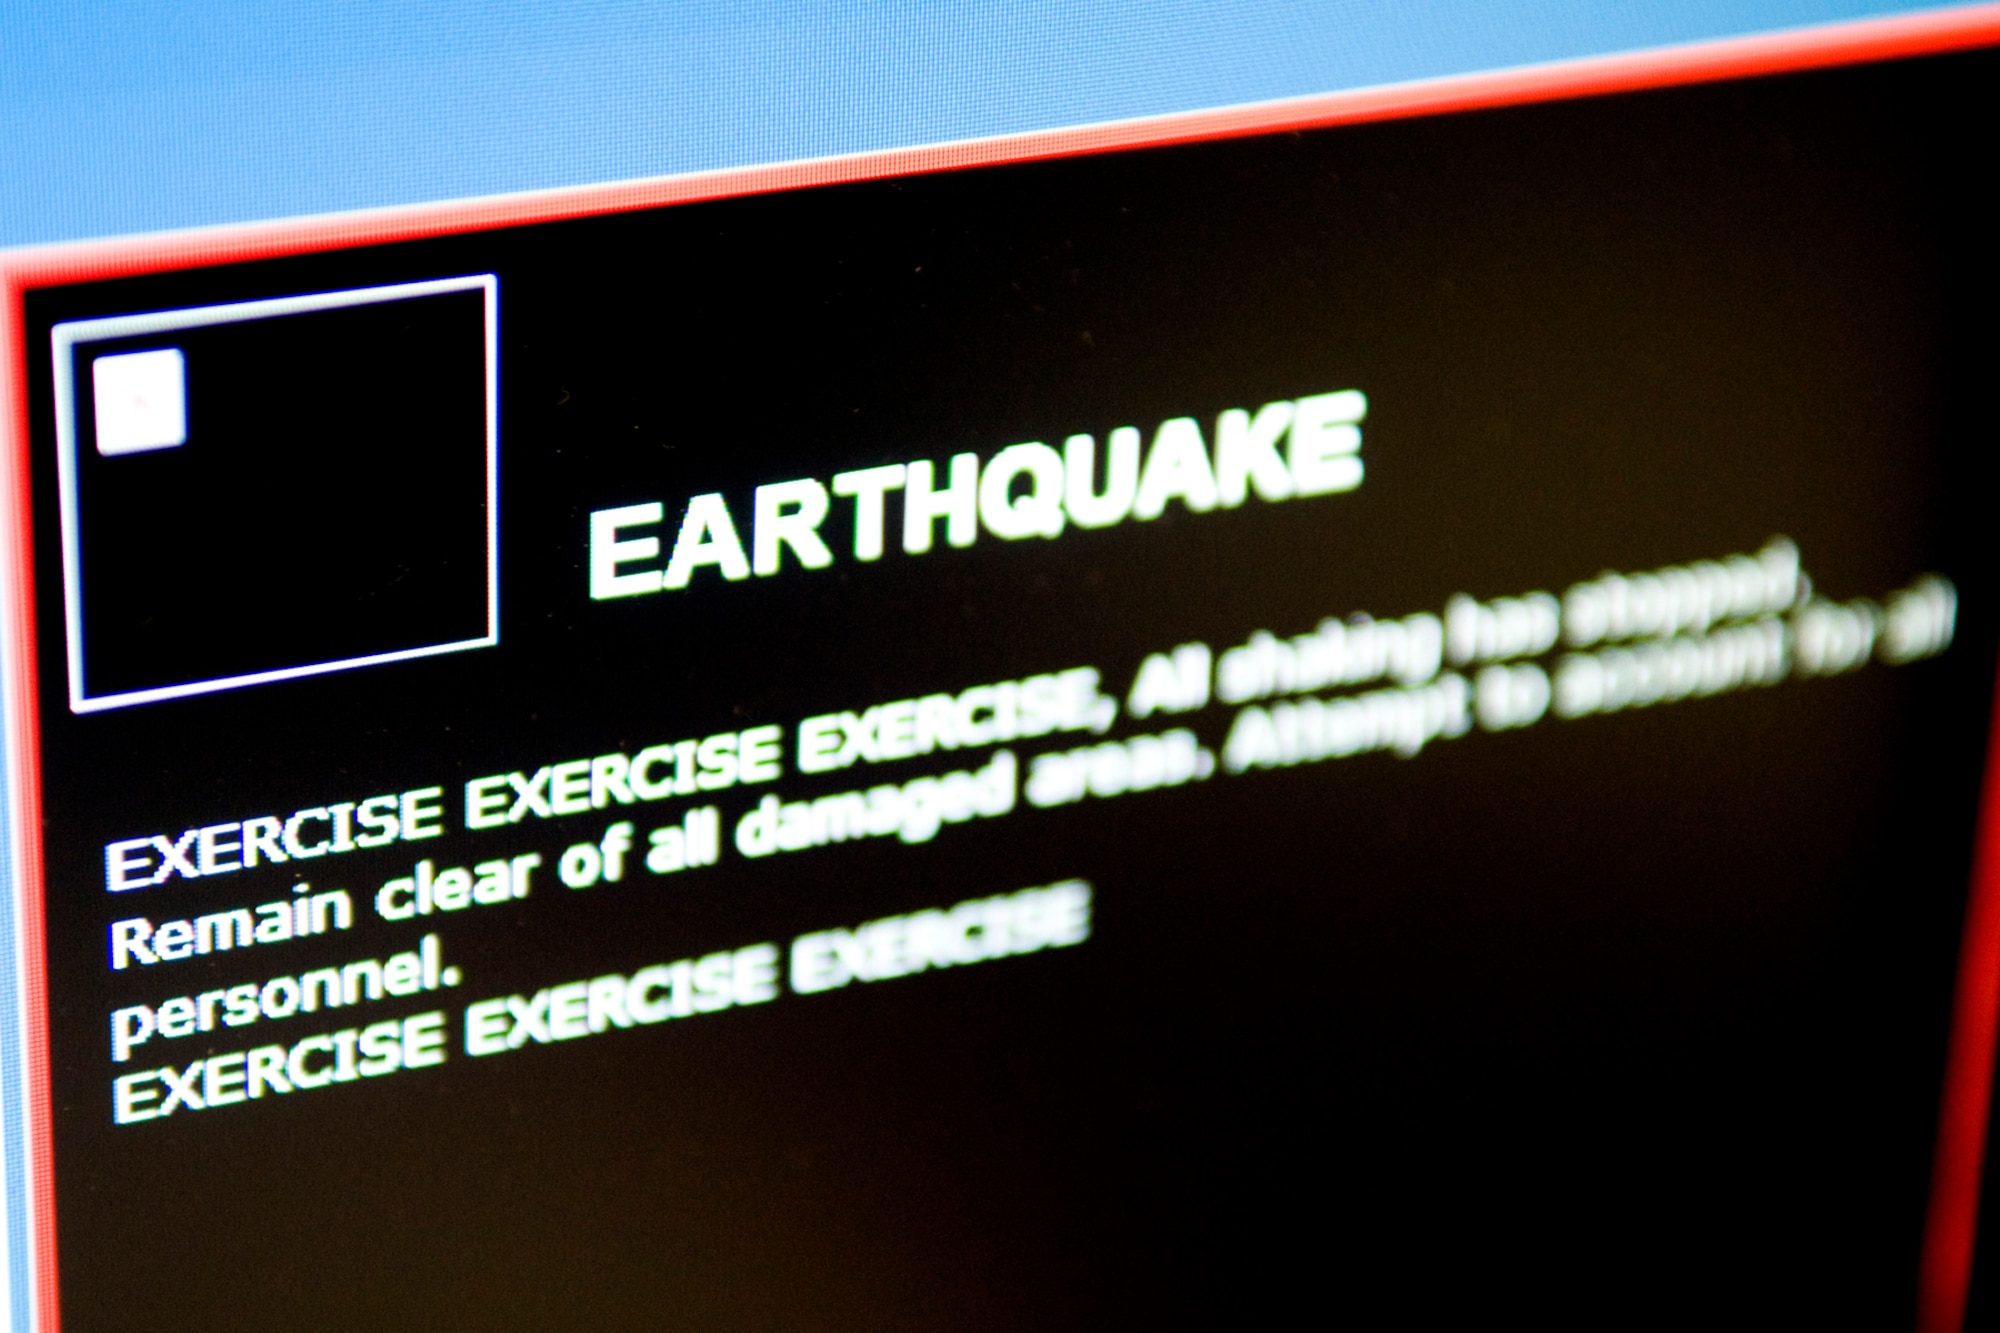 GRISSOM AIR RESERVE BASE, Ind. -- An earthquake exercise notification displays on a computer screen here Feb. 7. This computer-based notification system is one of many ways the base informs Grissom personnel with important information. (U.S. Air Force photo/Tech. Sgt. Mark R. W. Orders-Woempner)